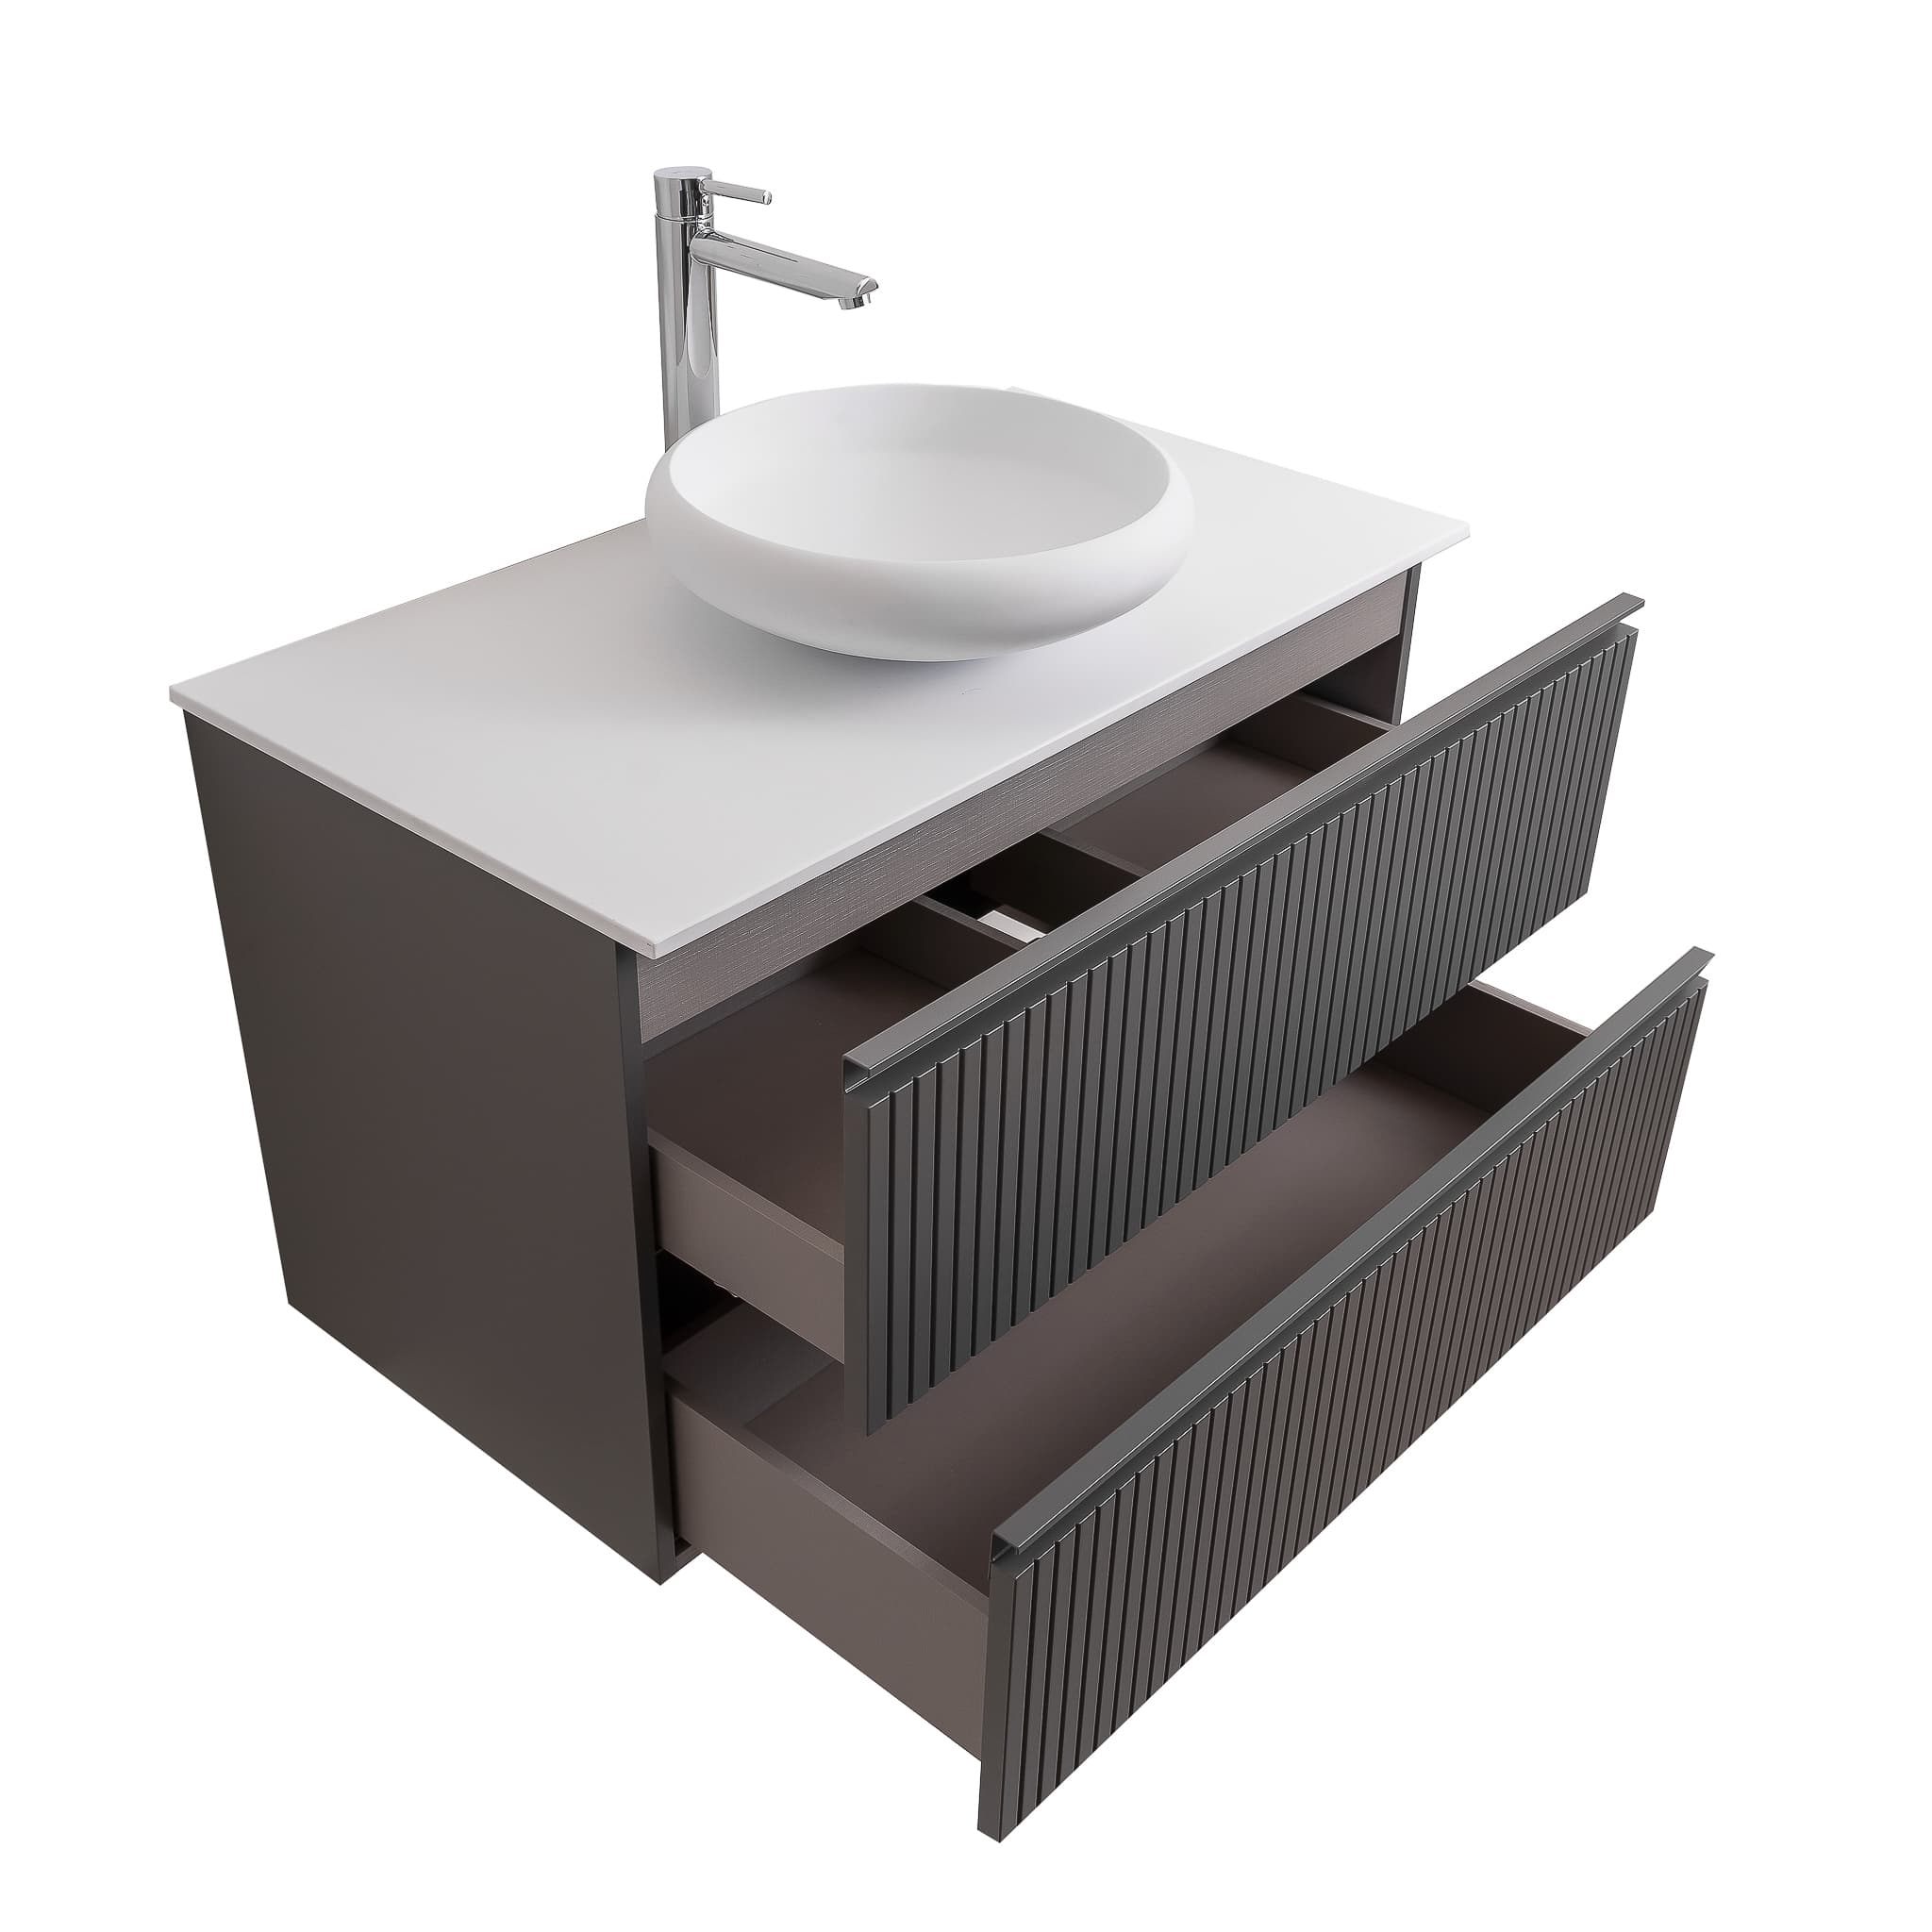 Ares 31.5 Matte Grey Cabinet, Solid Surface Flat White Counter And Round Solid Surface White Basin 1153, Wall Mounted Modern Vanity Set